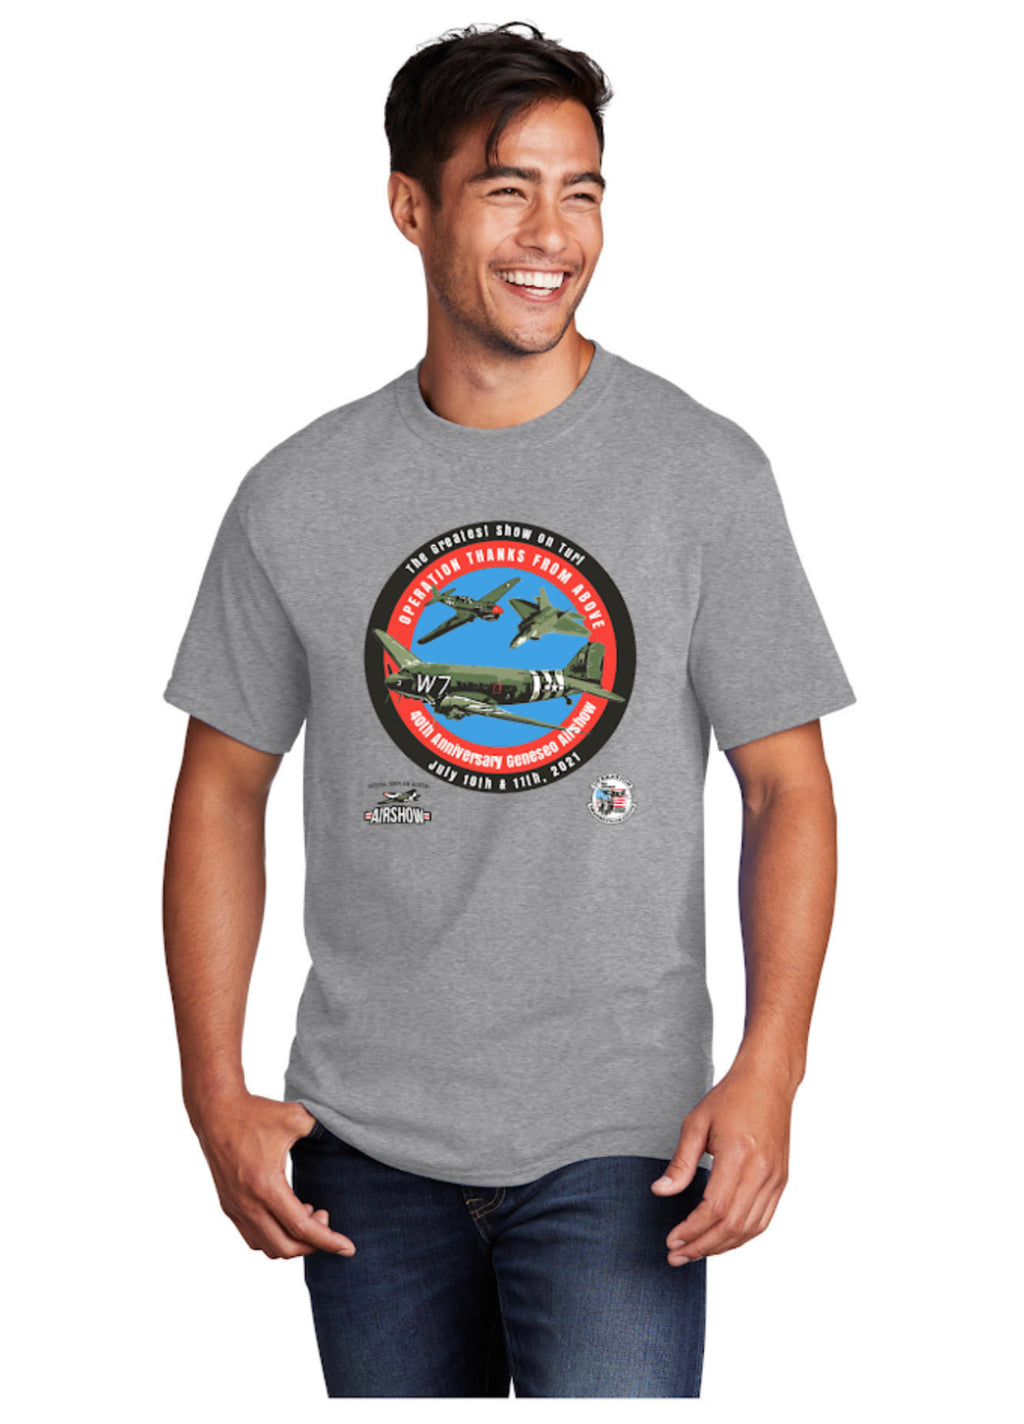 Official 2021 Geneseo Airshow Tee Shirt